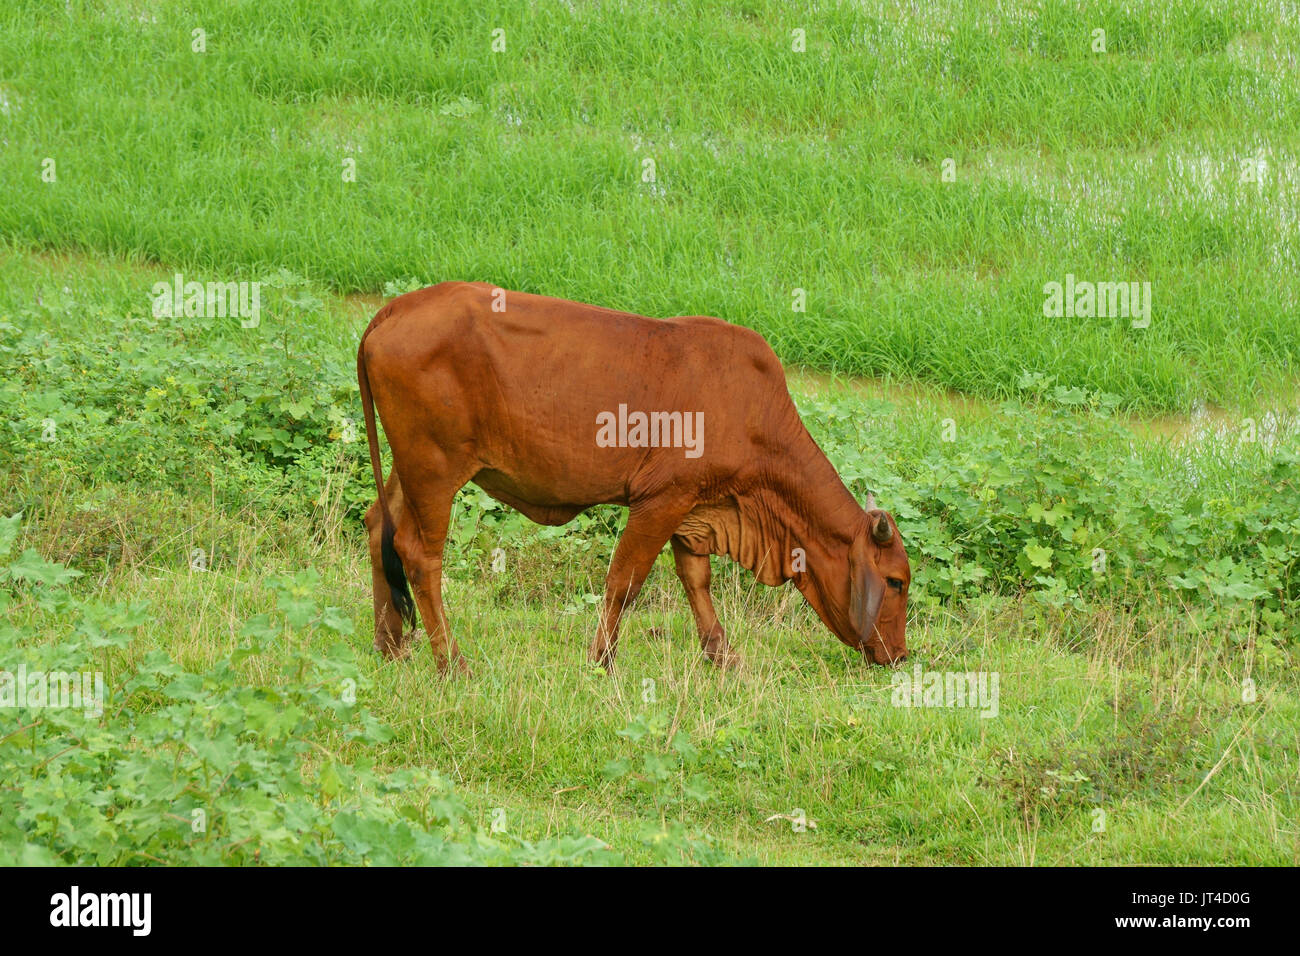 Brown cow grazing on the grass near the rice paddies Stock Photo